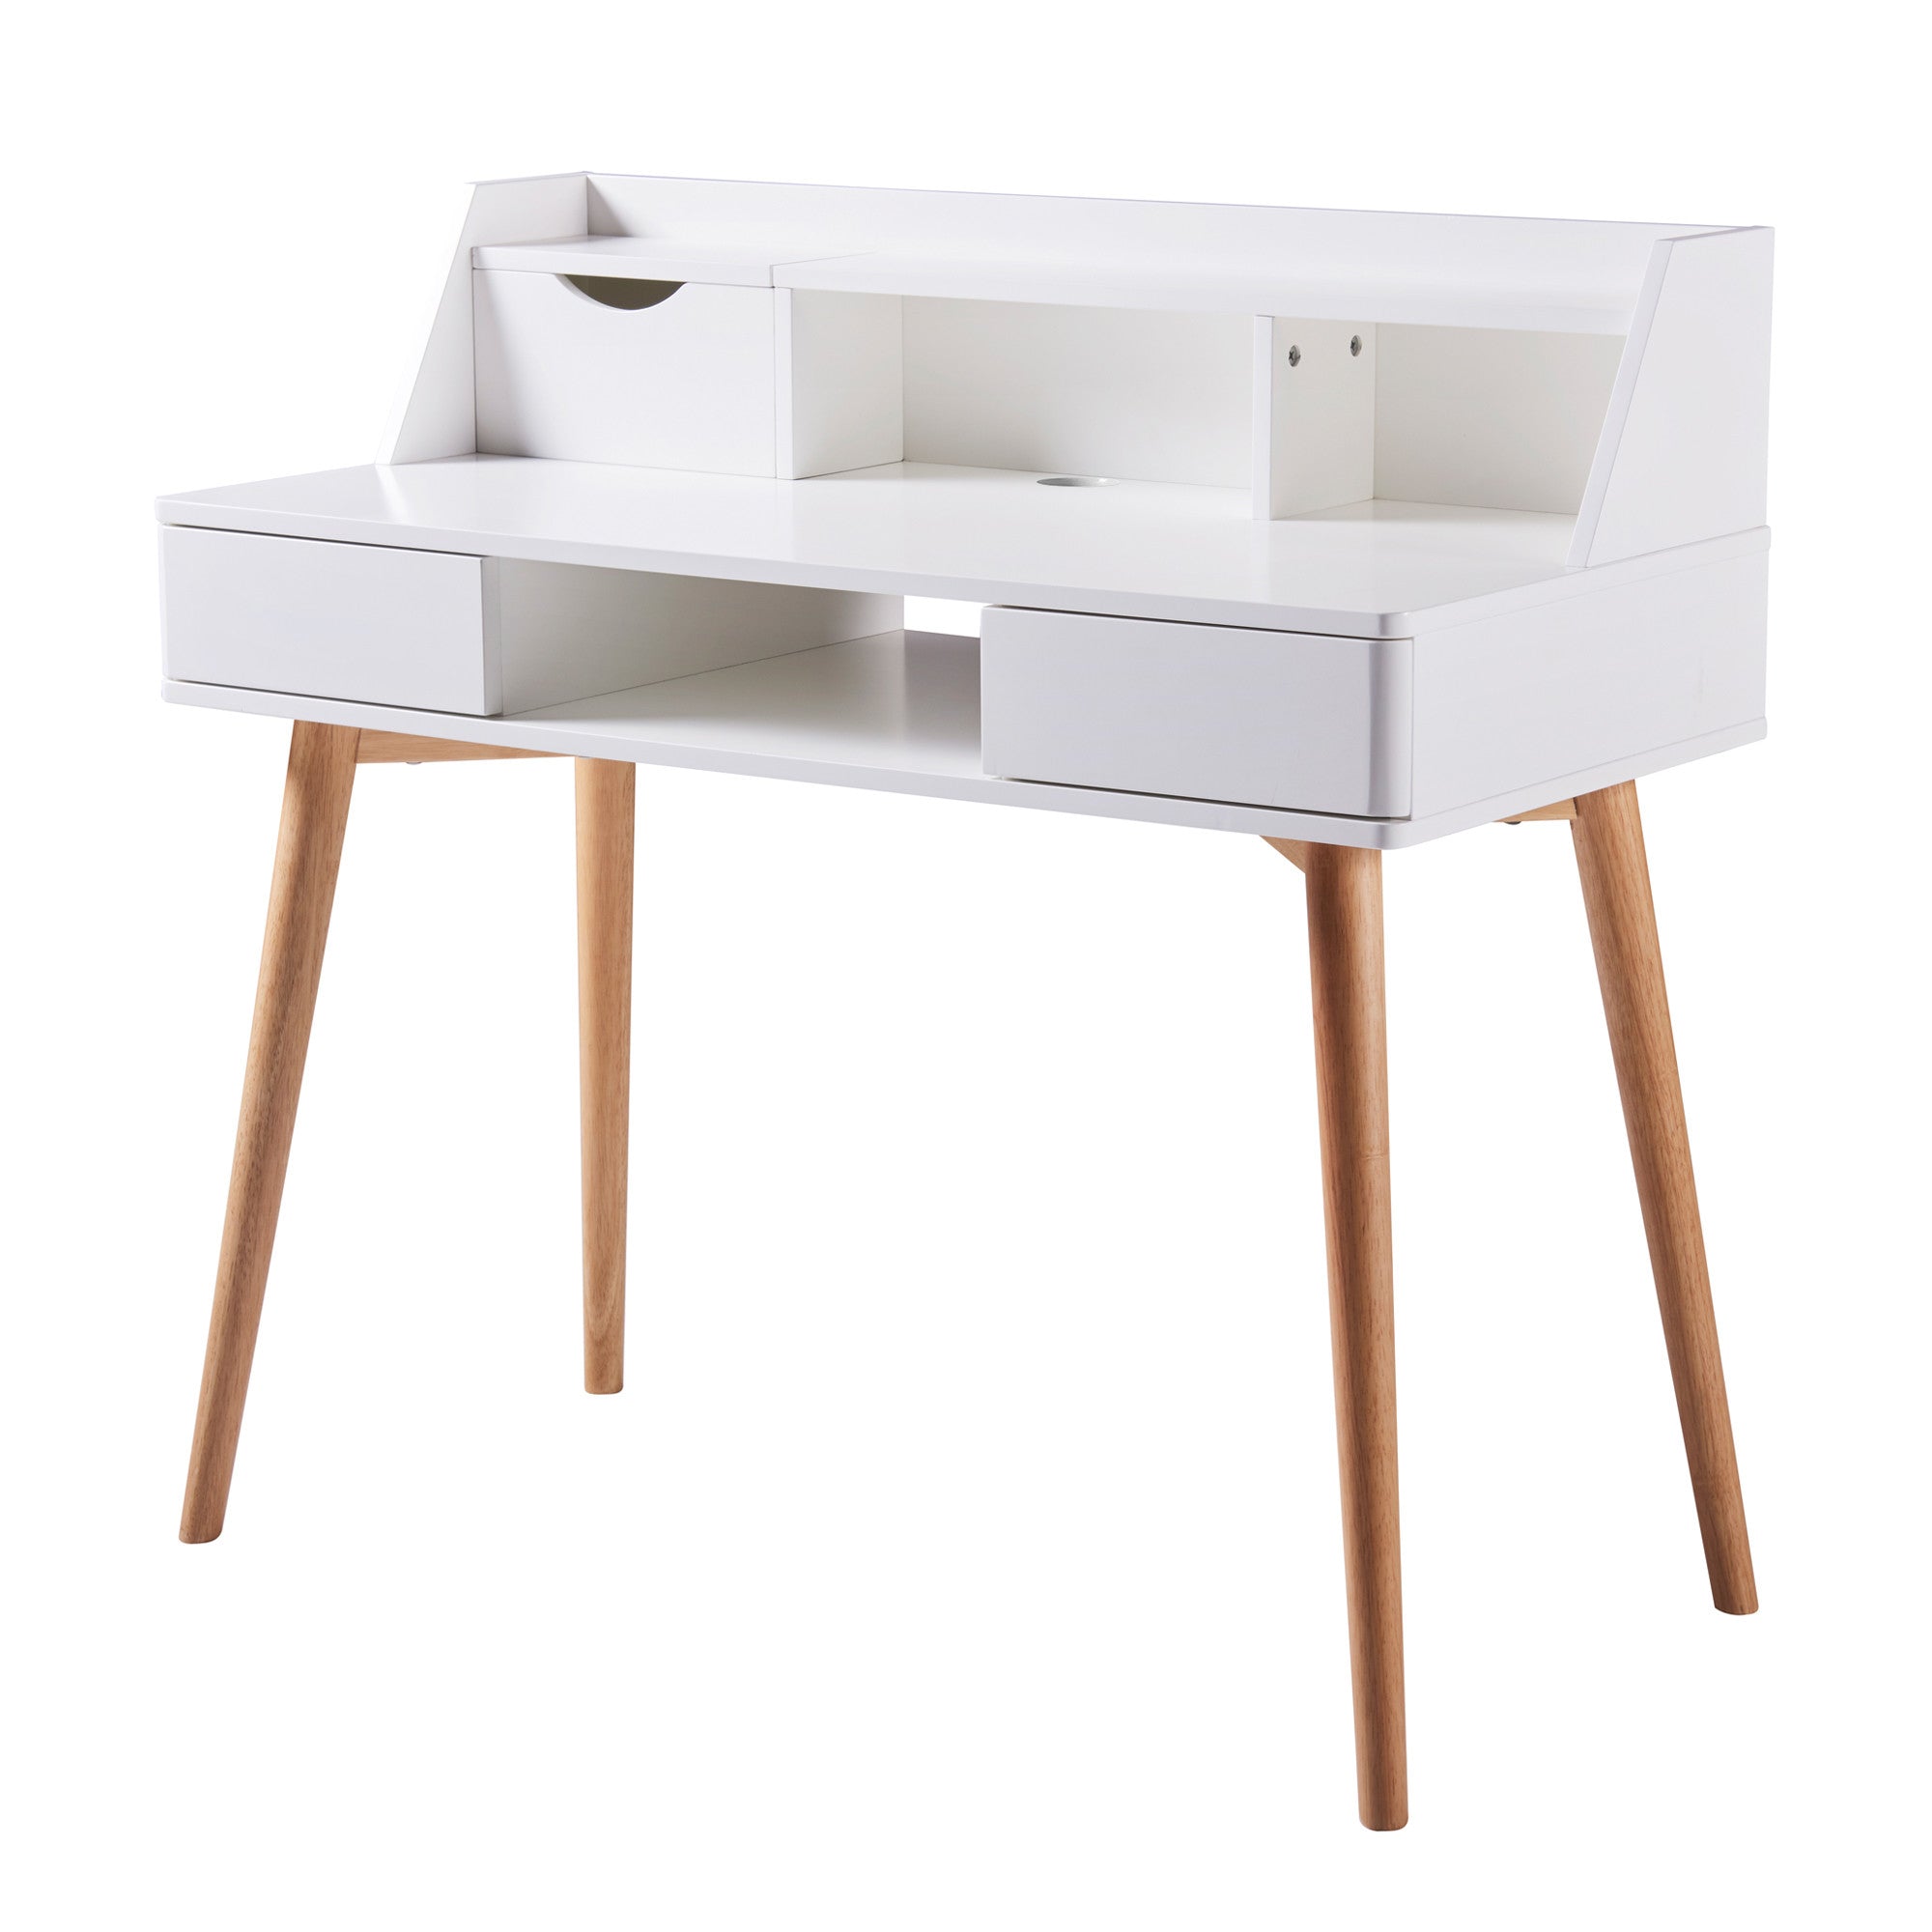 Small compact white and natural writing desk. Top of the desk has a hutch with storage.